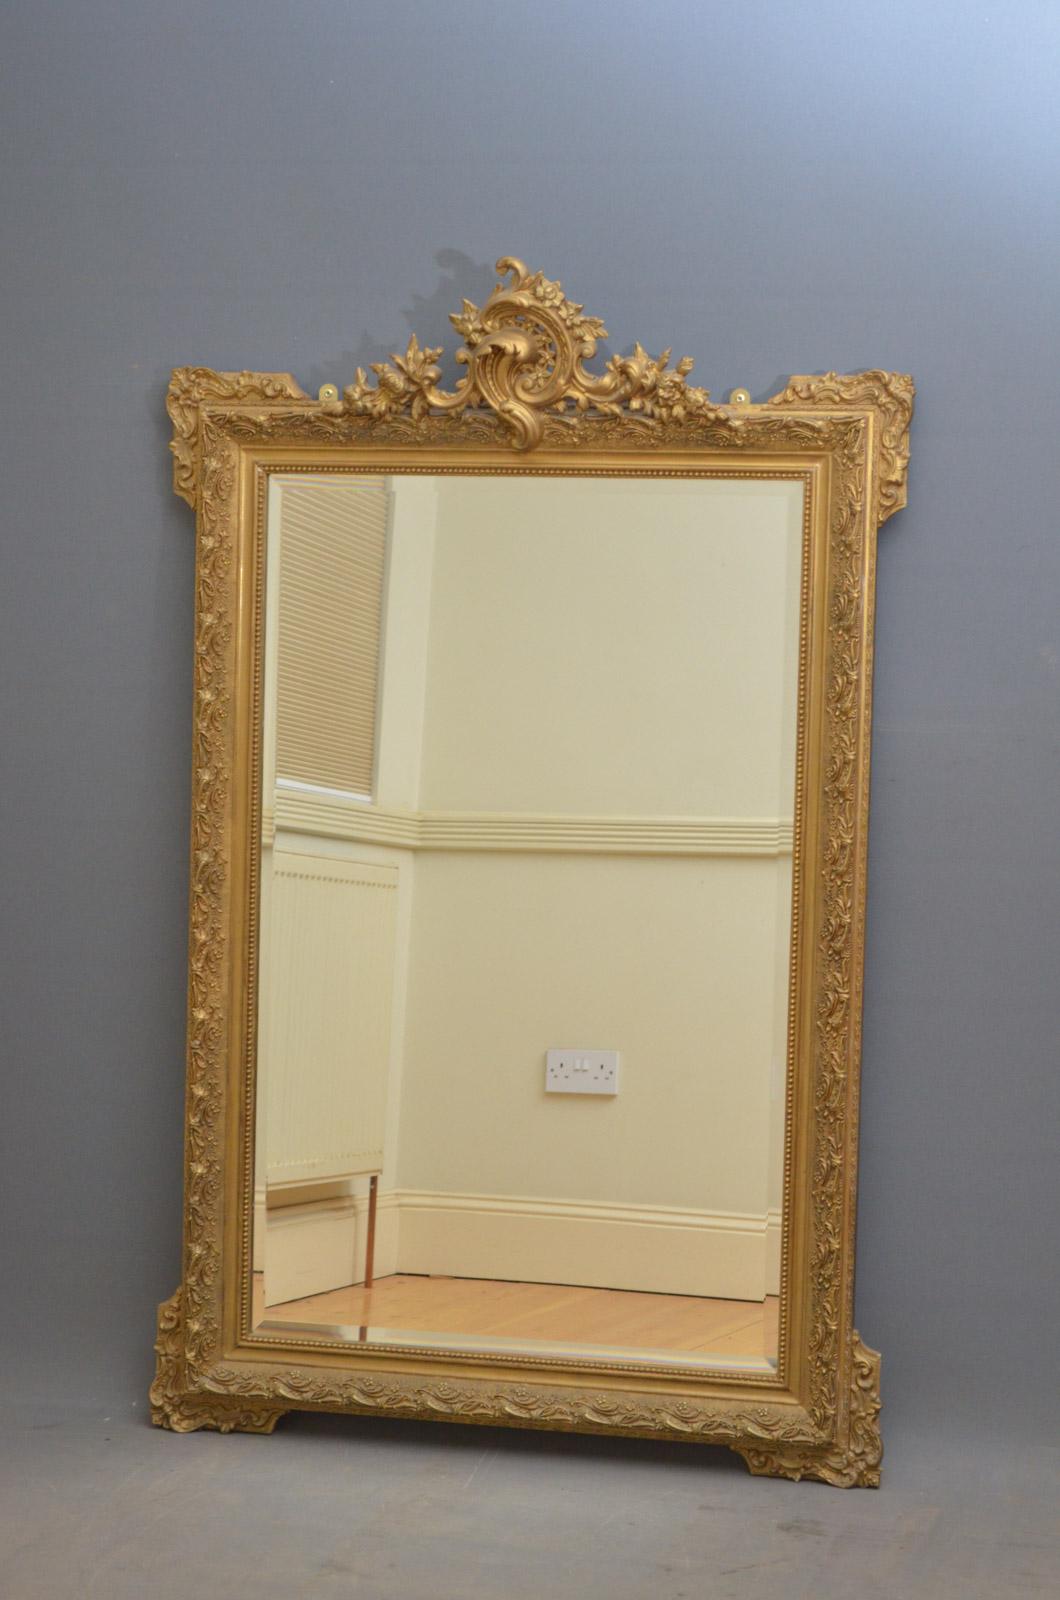 Sn4412 large giltwood wall mirror, having exceptional cresting with scrolls, flowers and leaves to top, and original bevelled mirror plate in finely carved frame. This mirror been refinished in the past and is fantastic condition throughout - ready